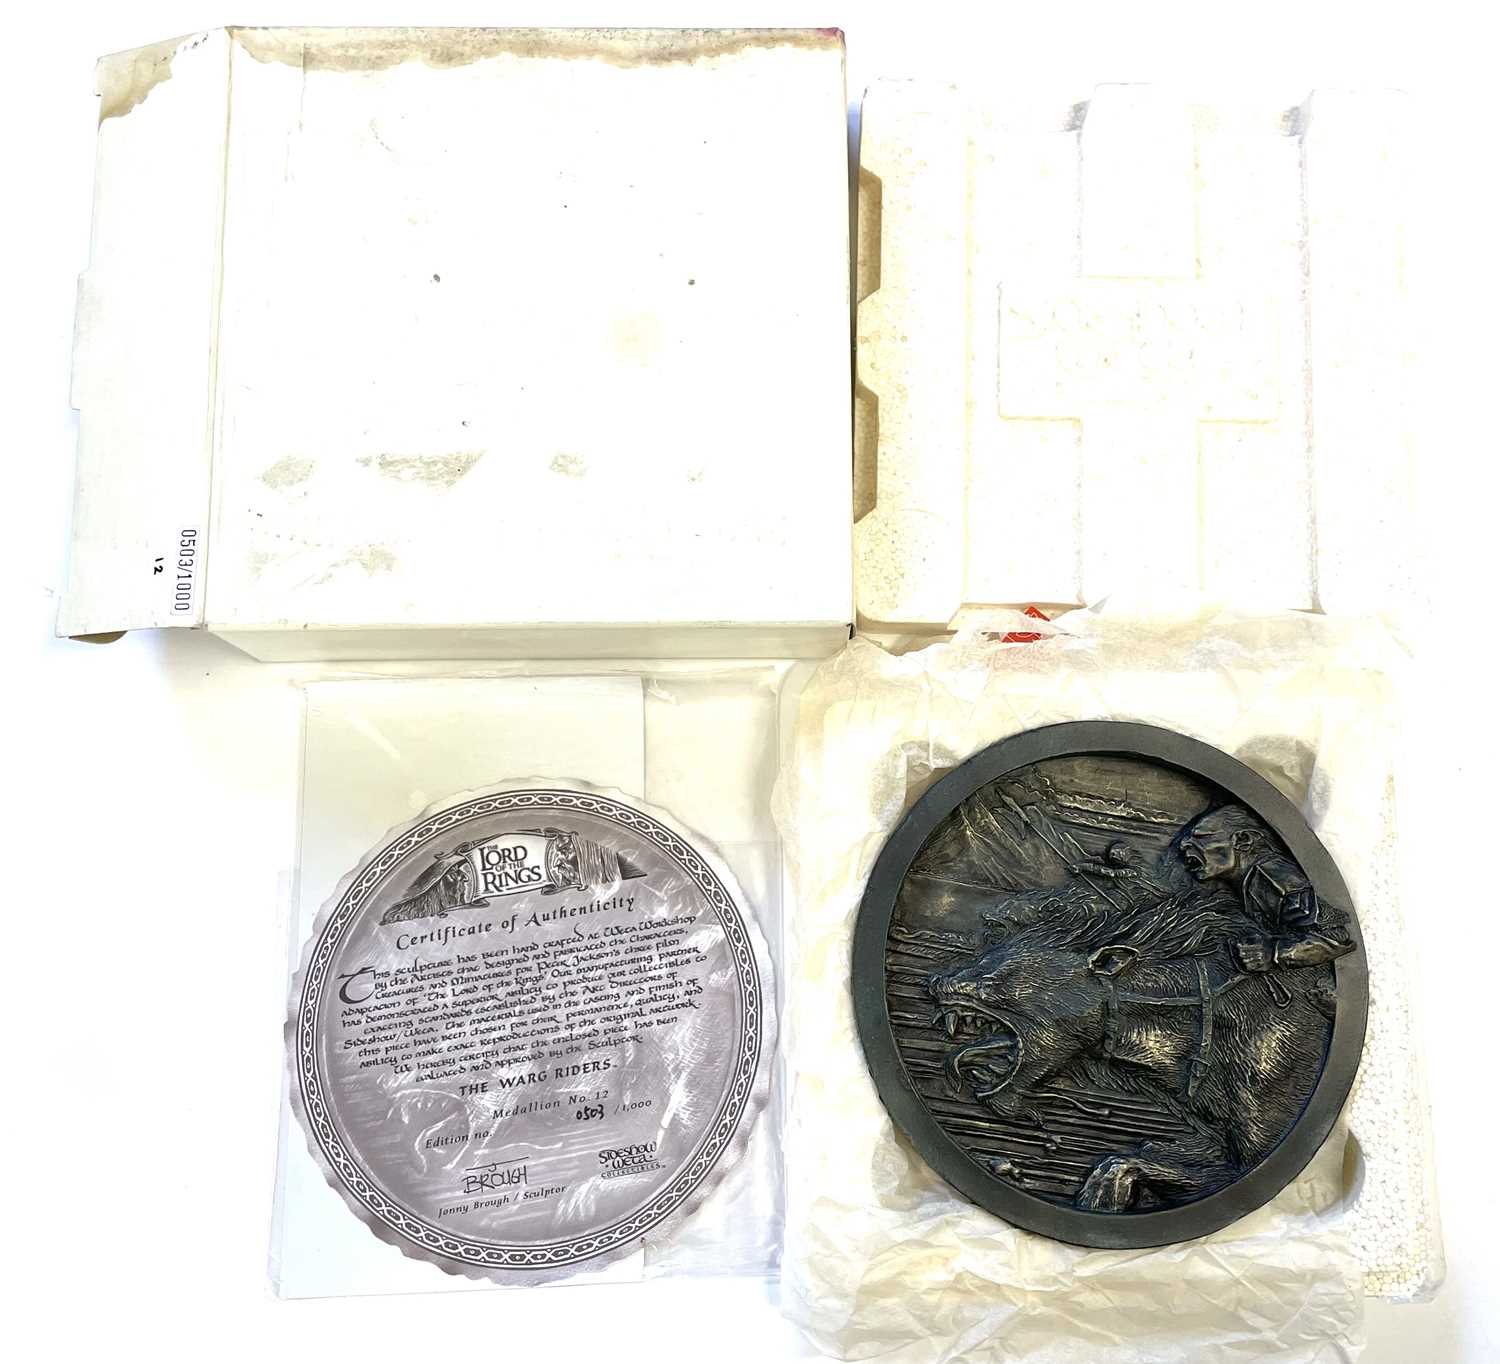 Sideshow Weta Lord of the Rings medallion - The Orcs of Moria, 424/10,000, in original box/packaging - Image 2 of 2